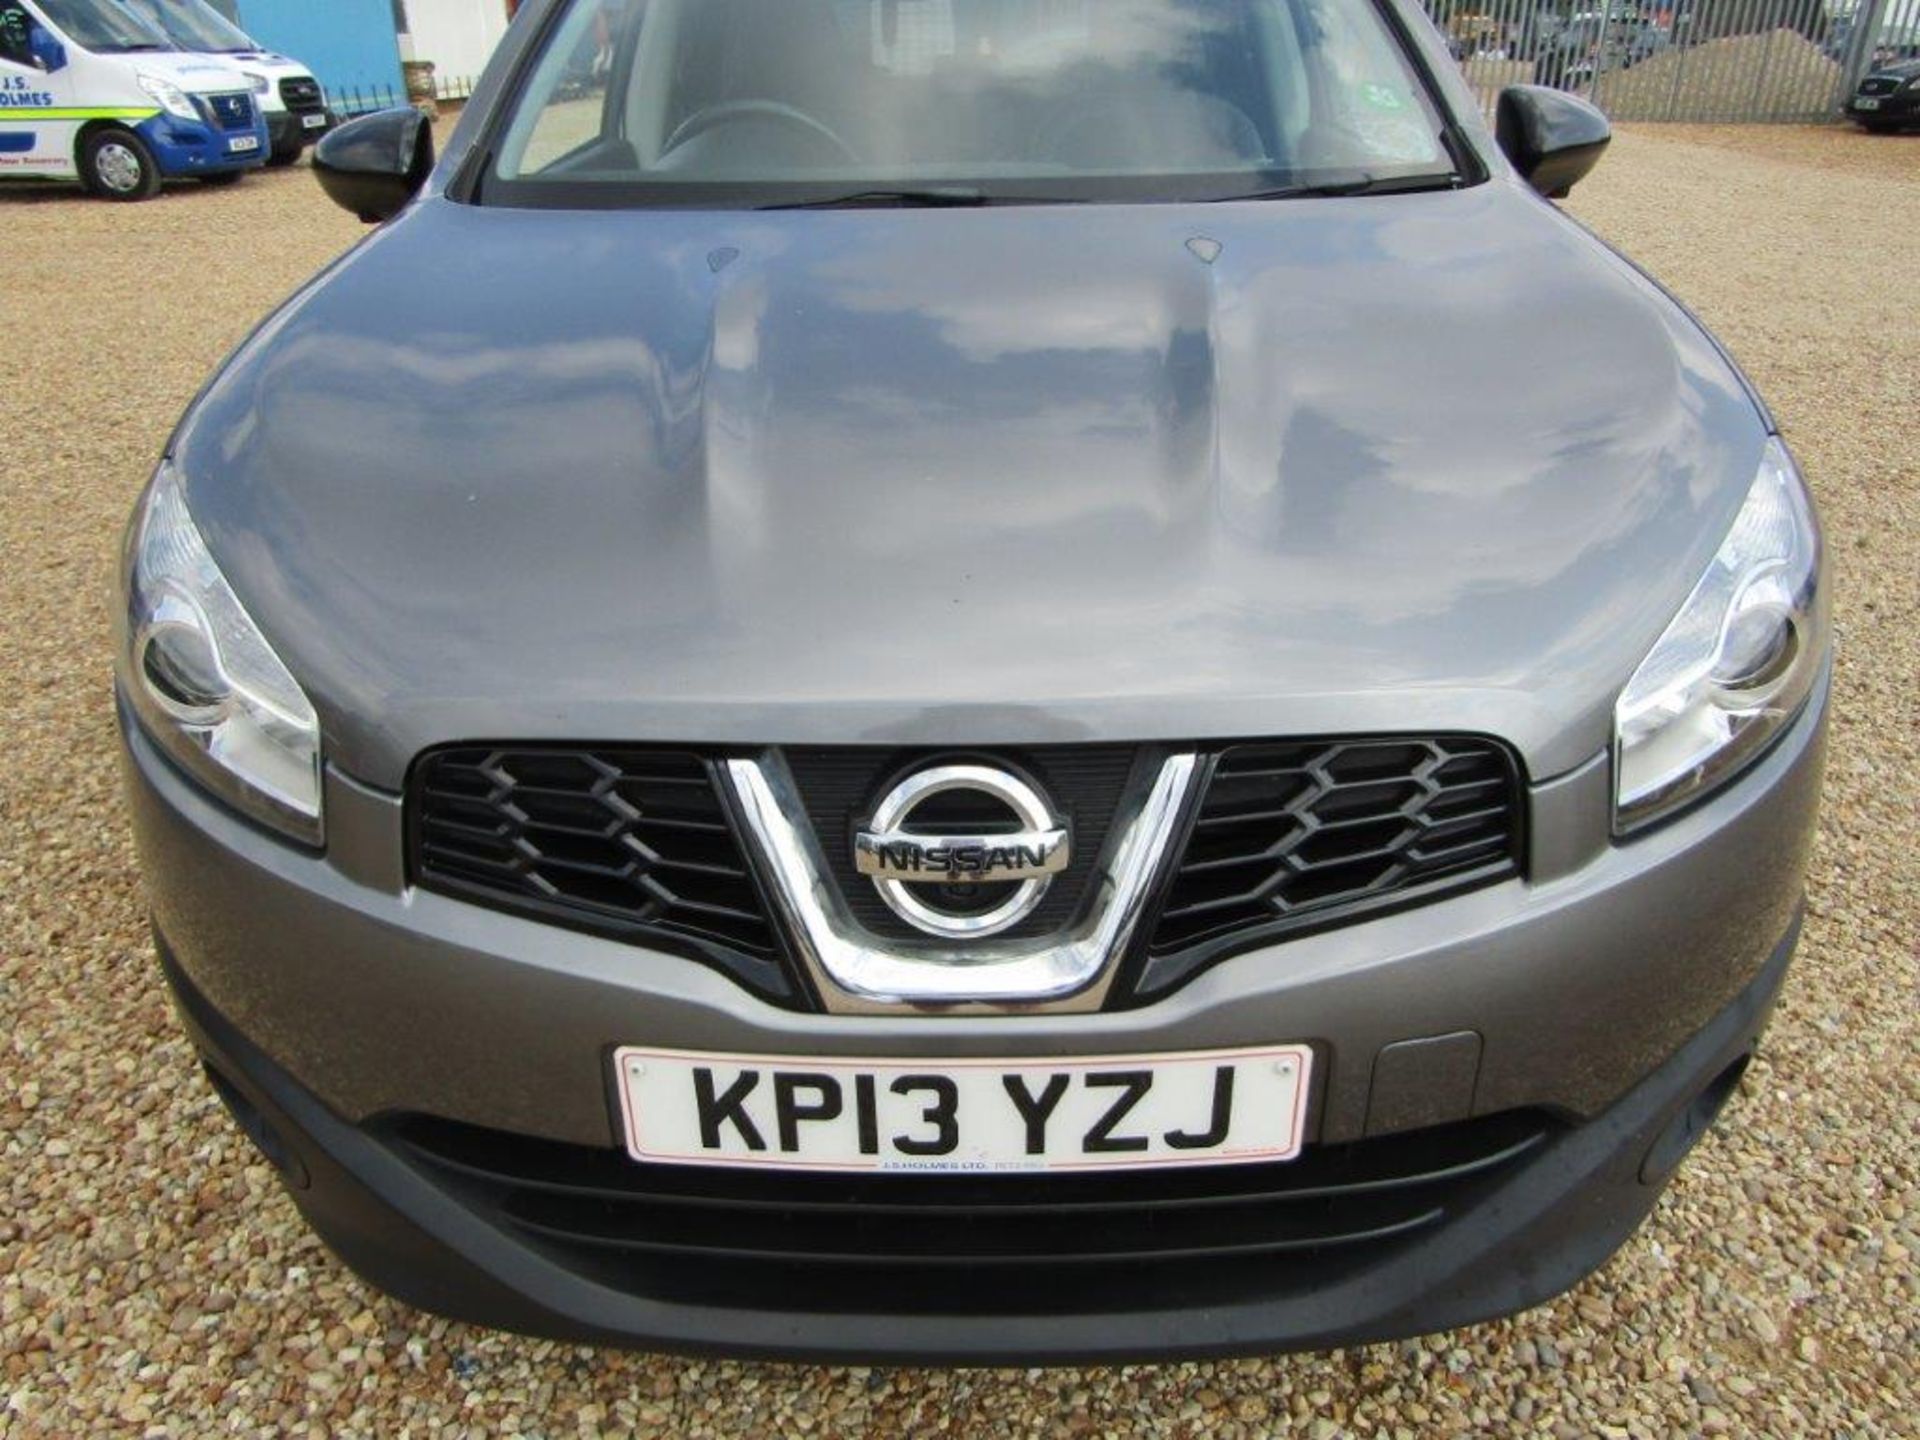 13 13 Nissan Qashqai 360 iS DCi - Image 7 of 27